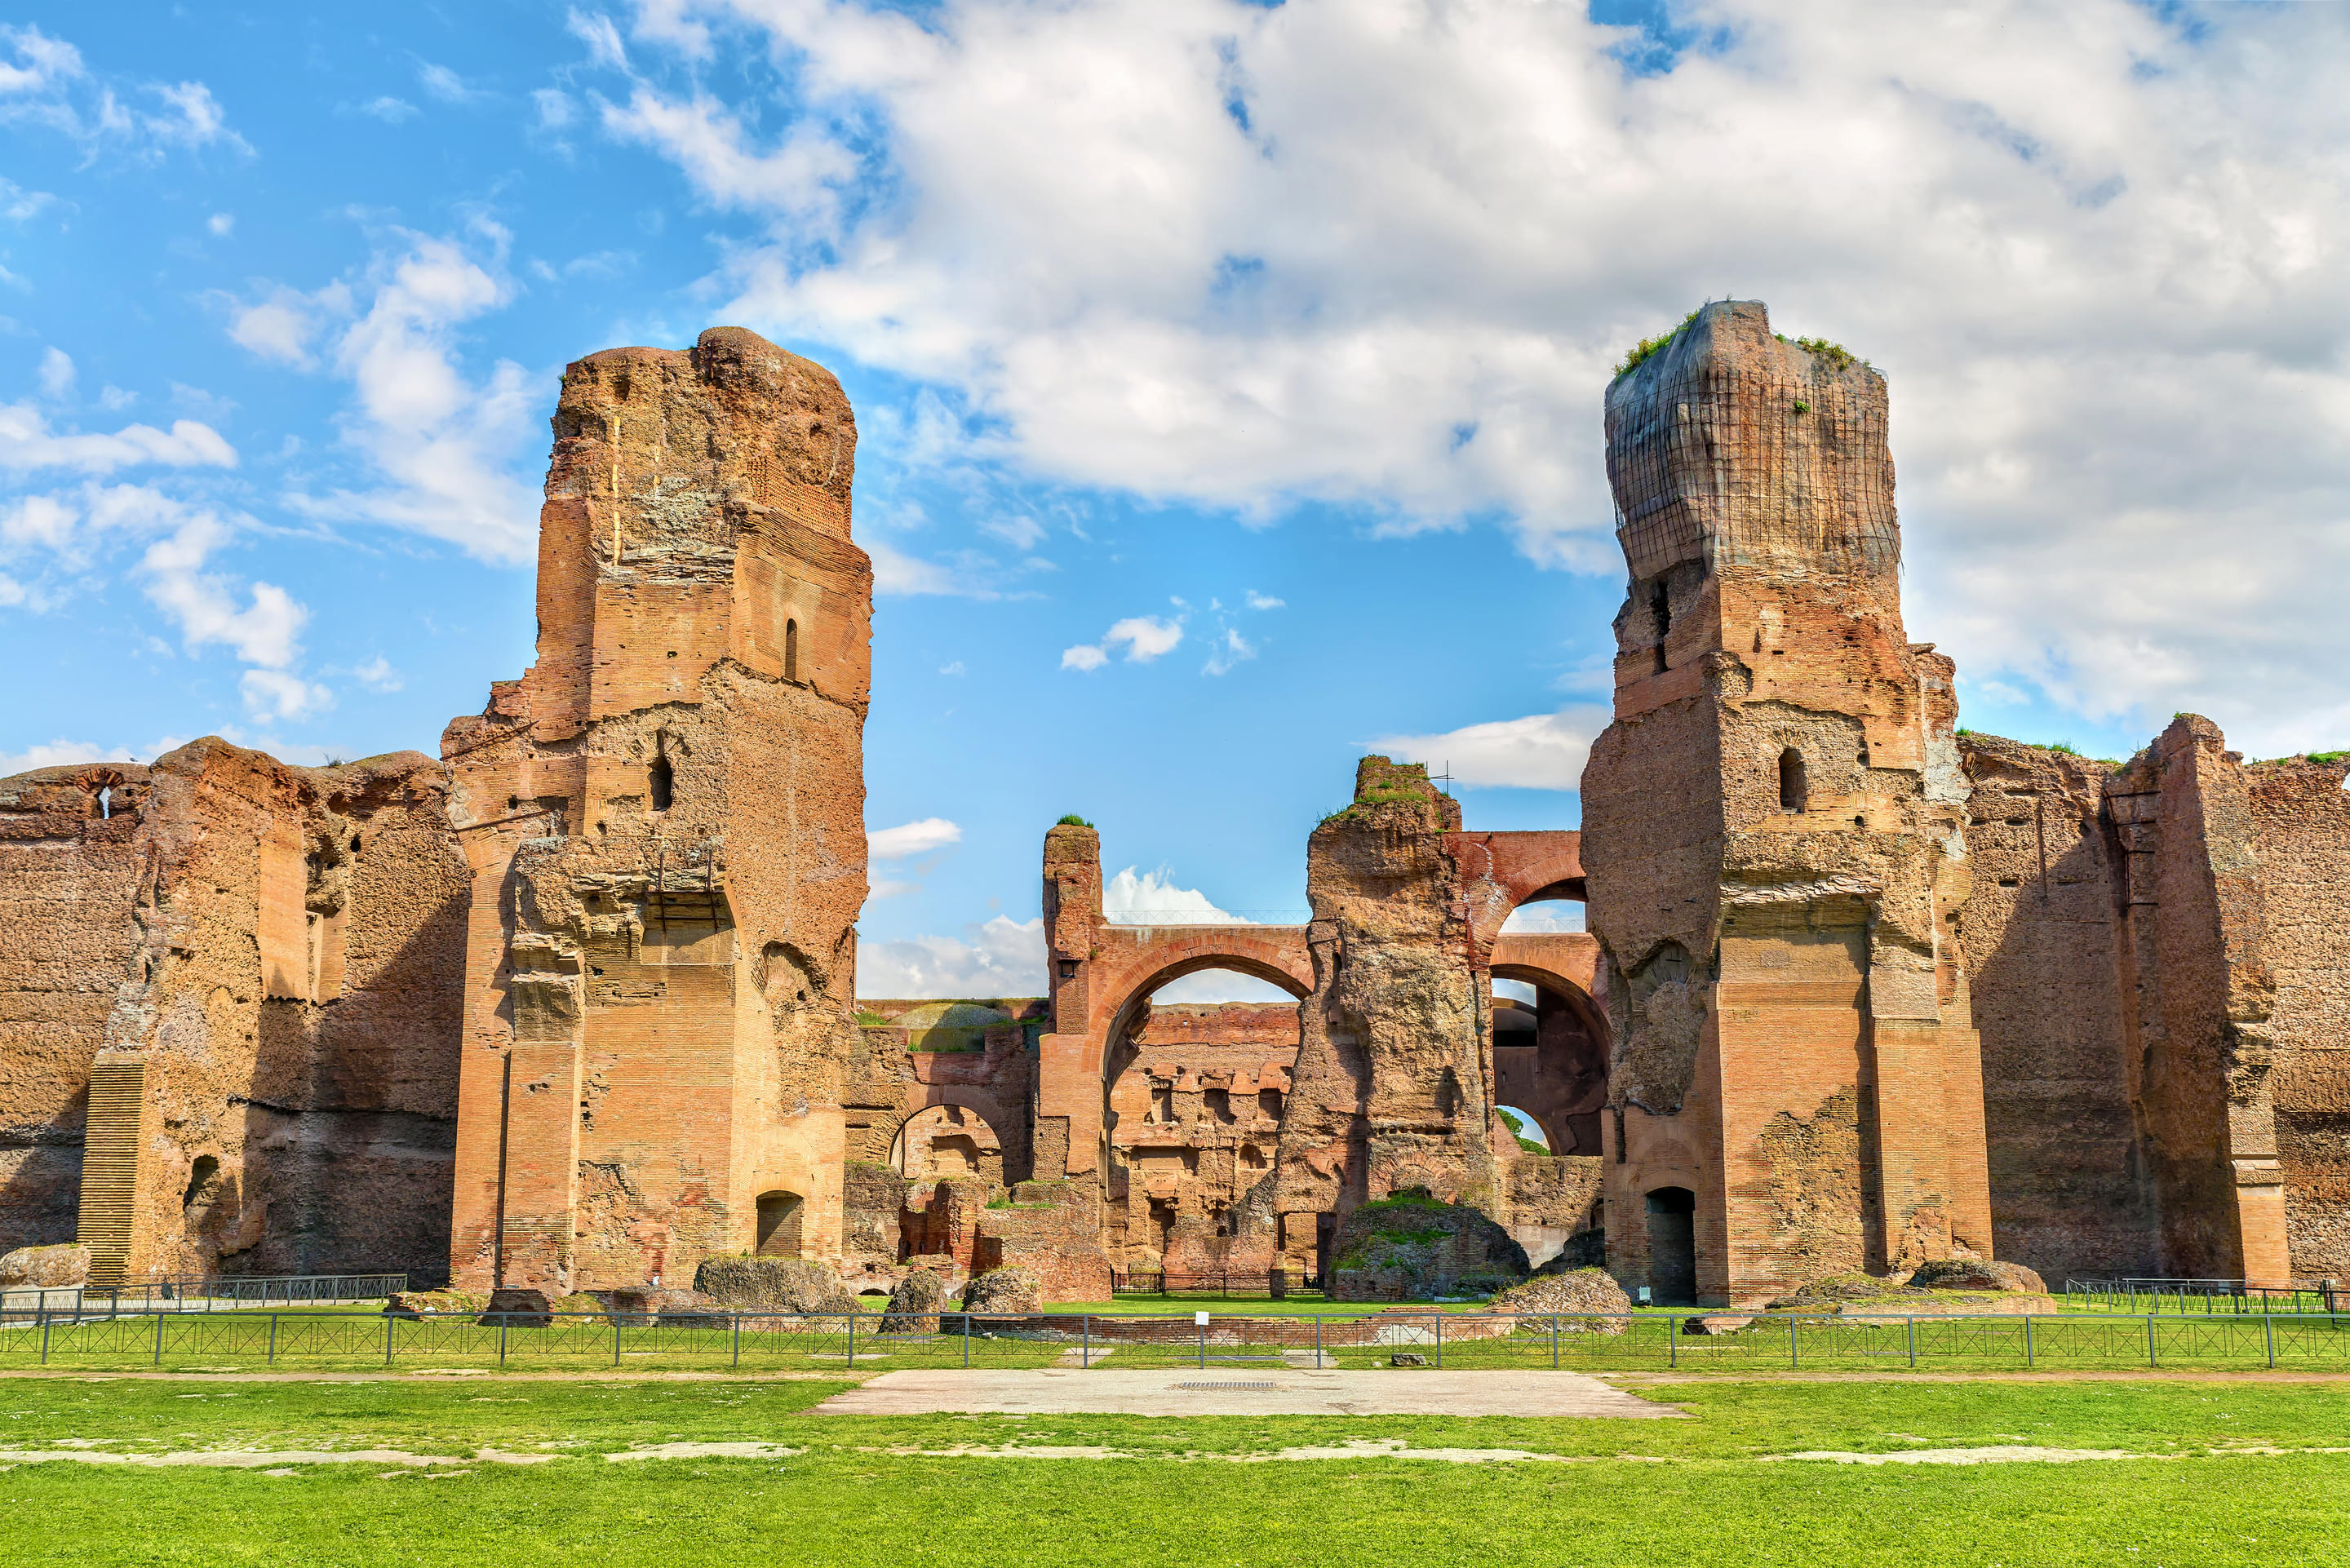 Baths Of Caracalla Overview